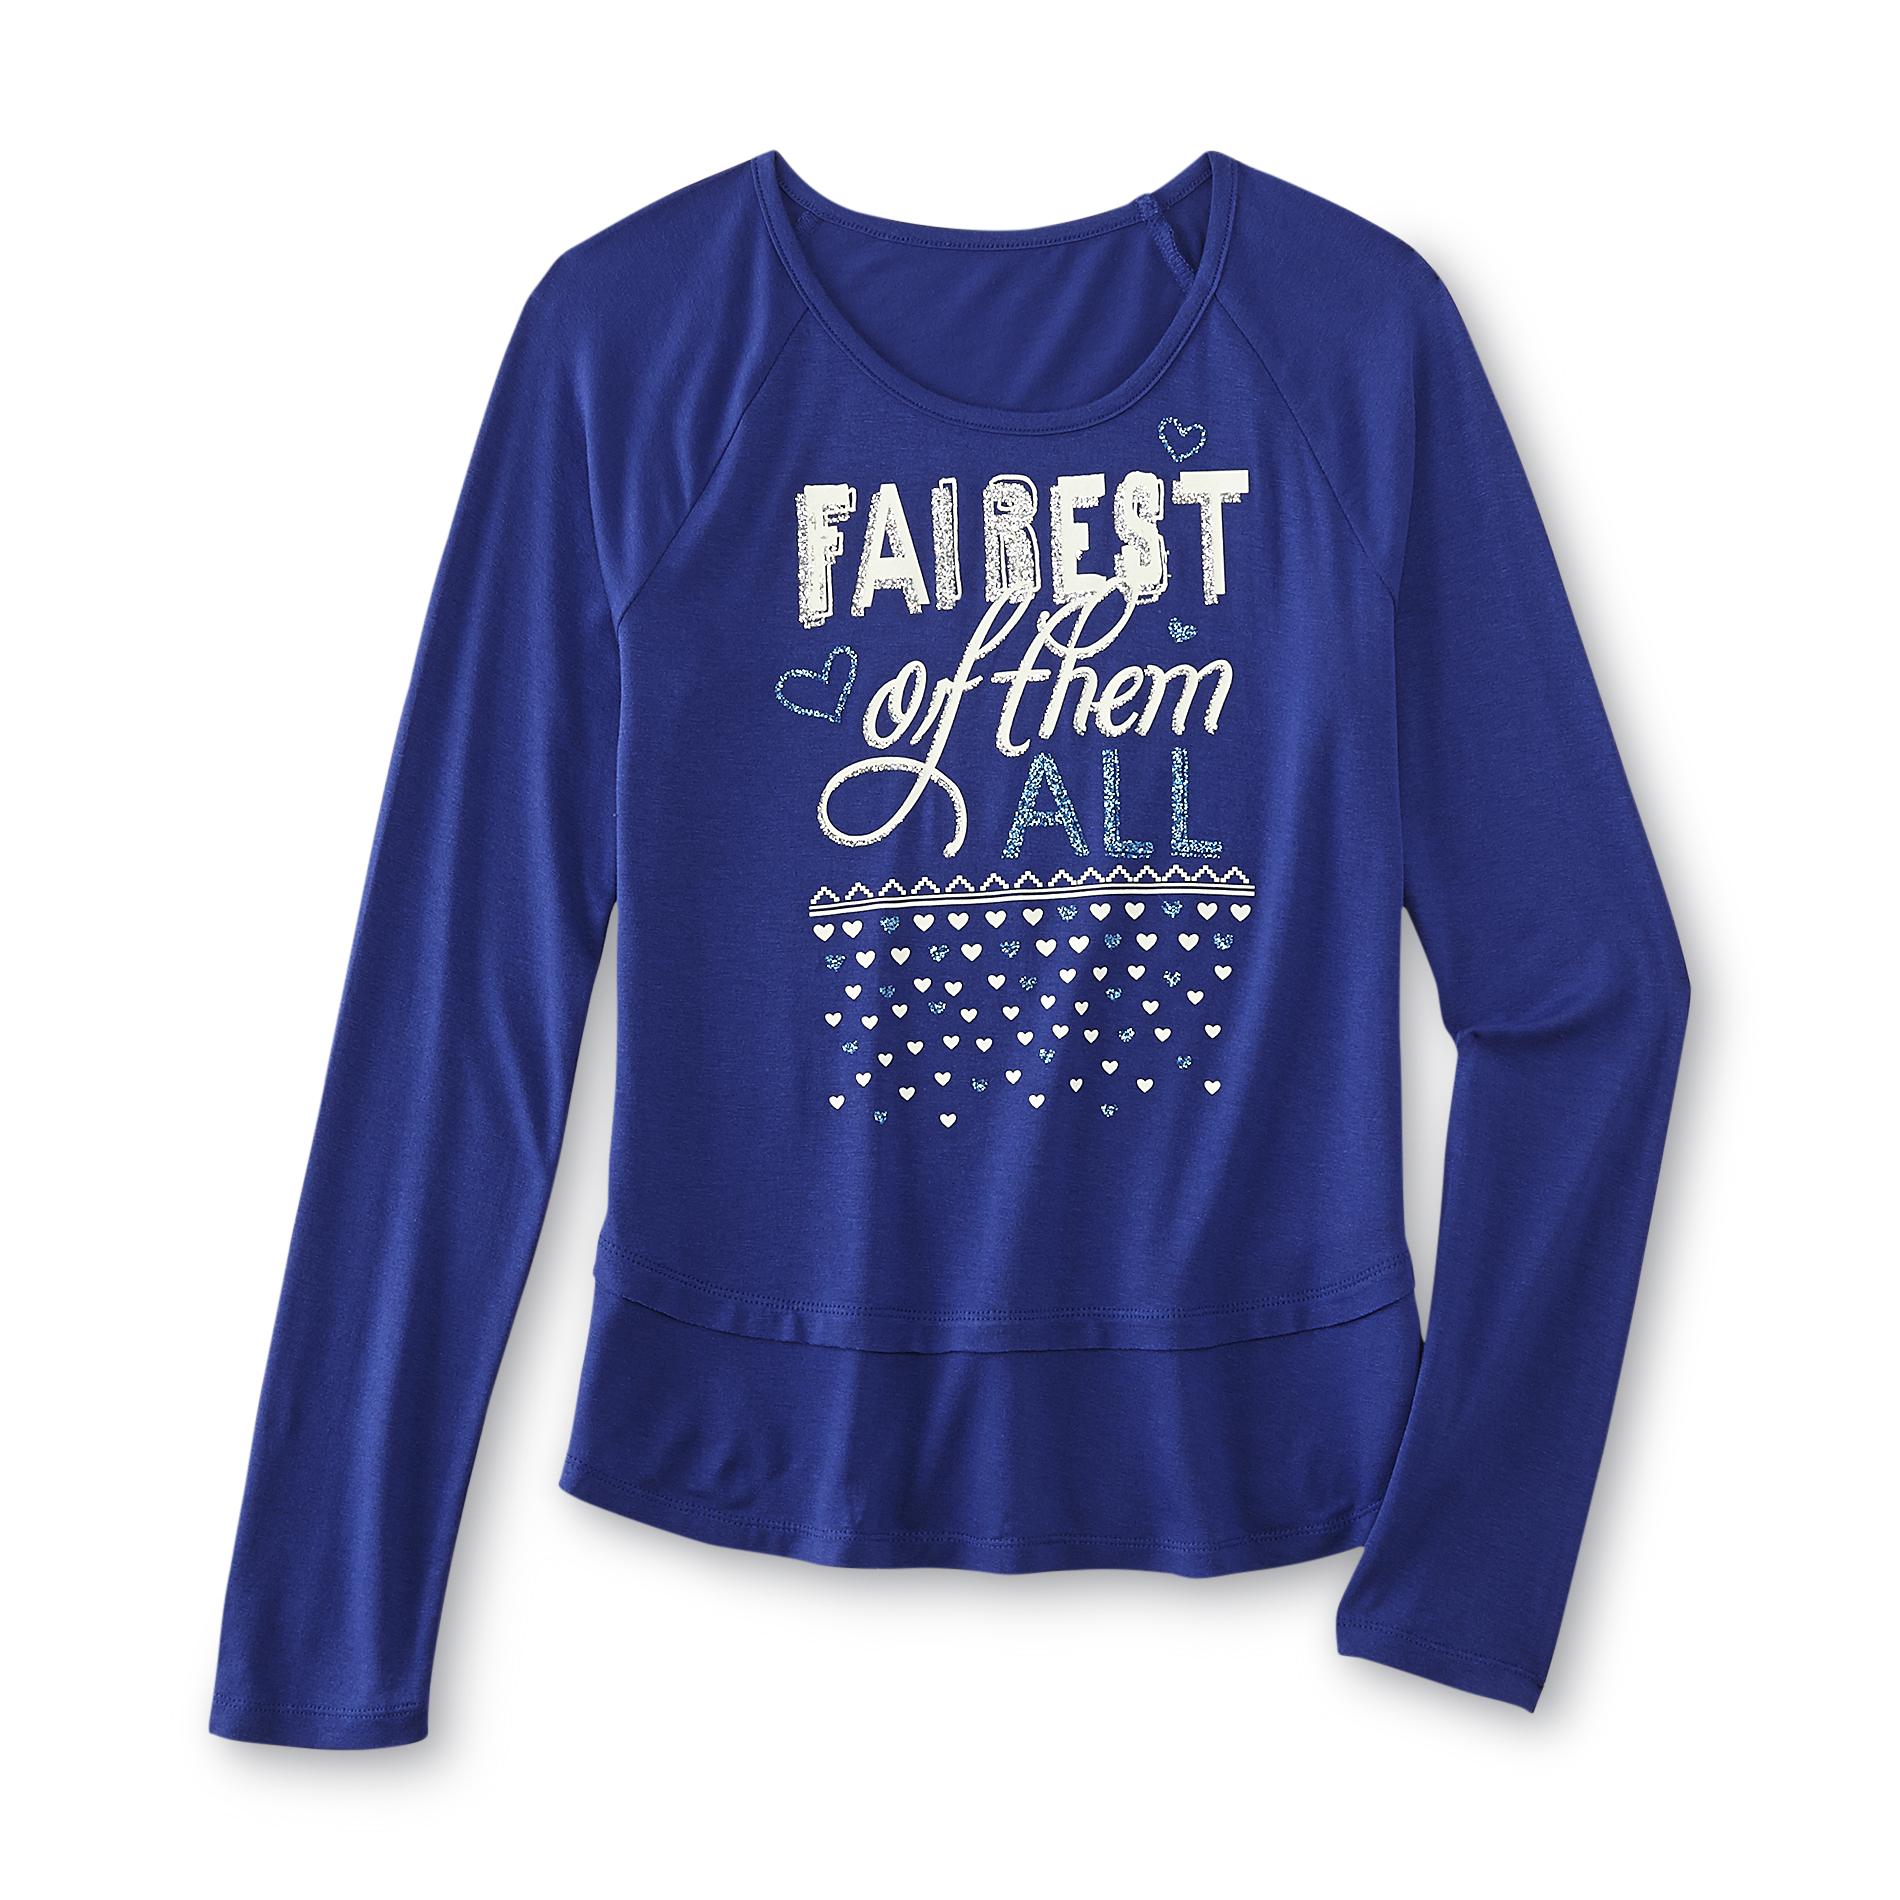 Canyon River Blues Girl's Graphic Shirt - Fairest of All